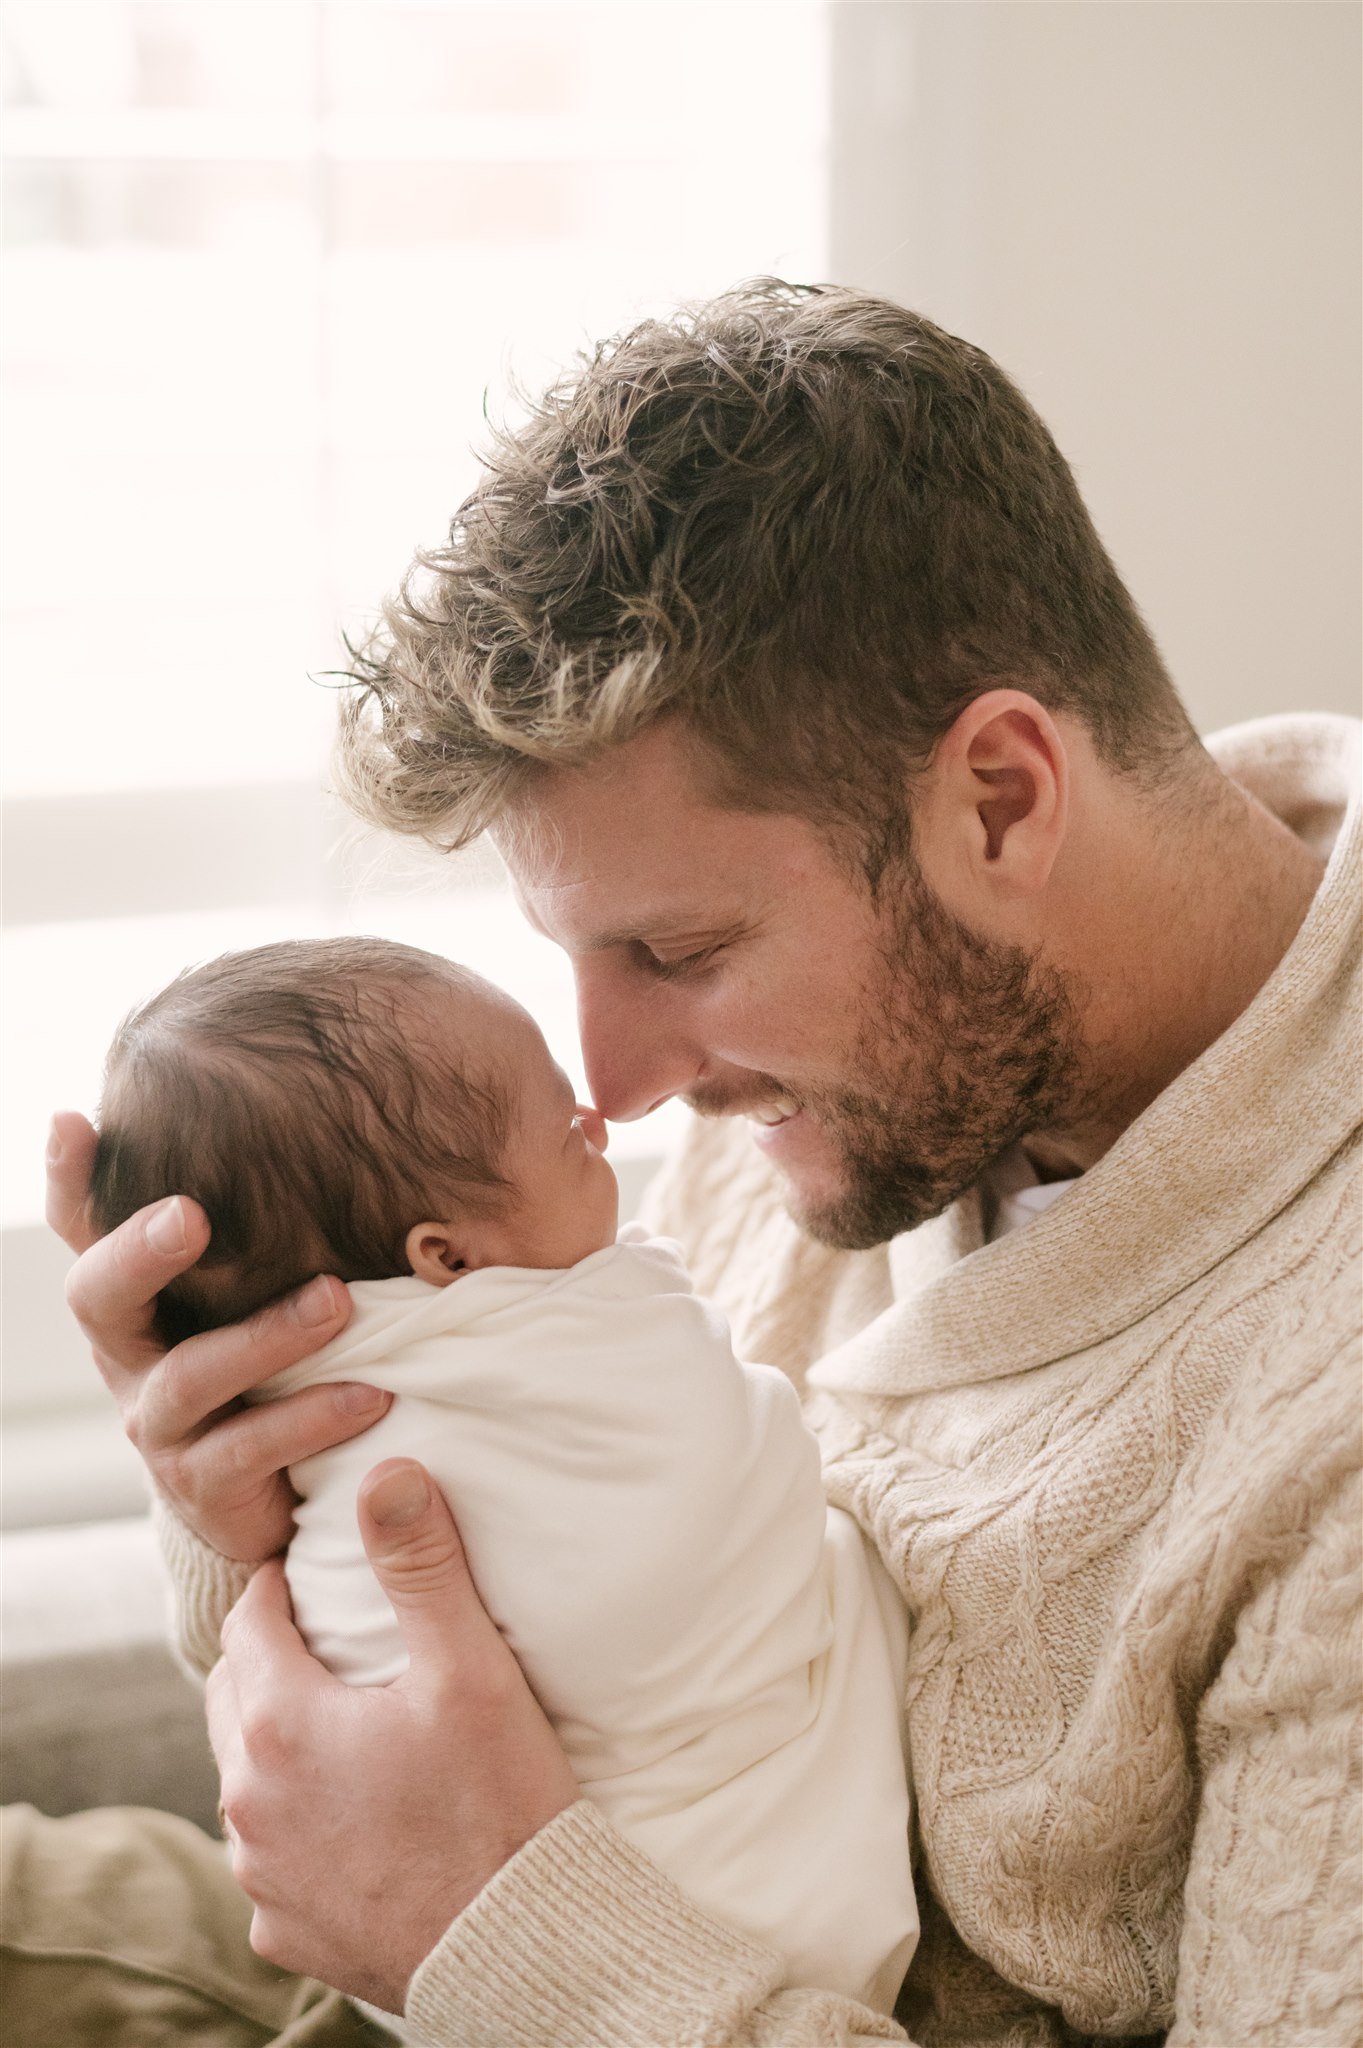 Dad and newborn touching noses during newborn shoot